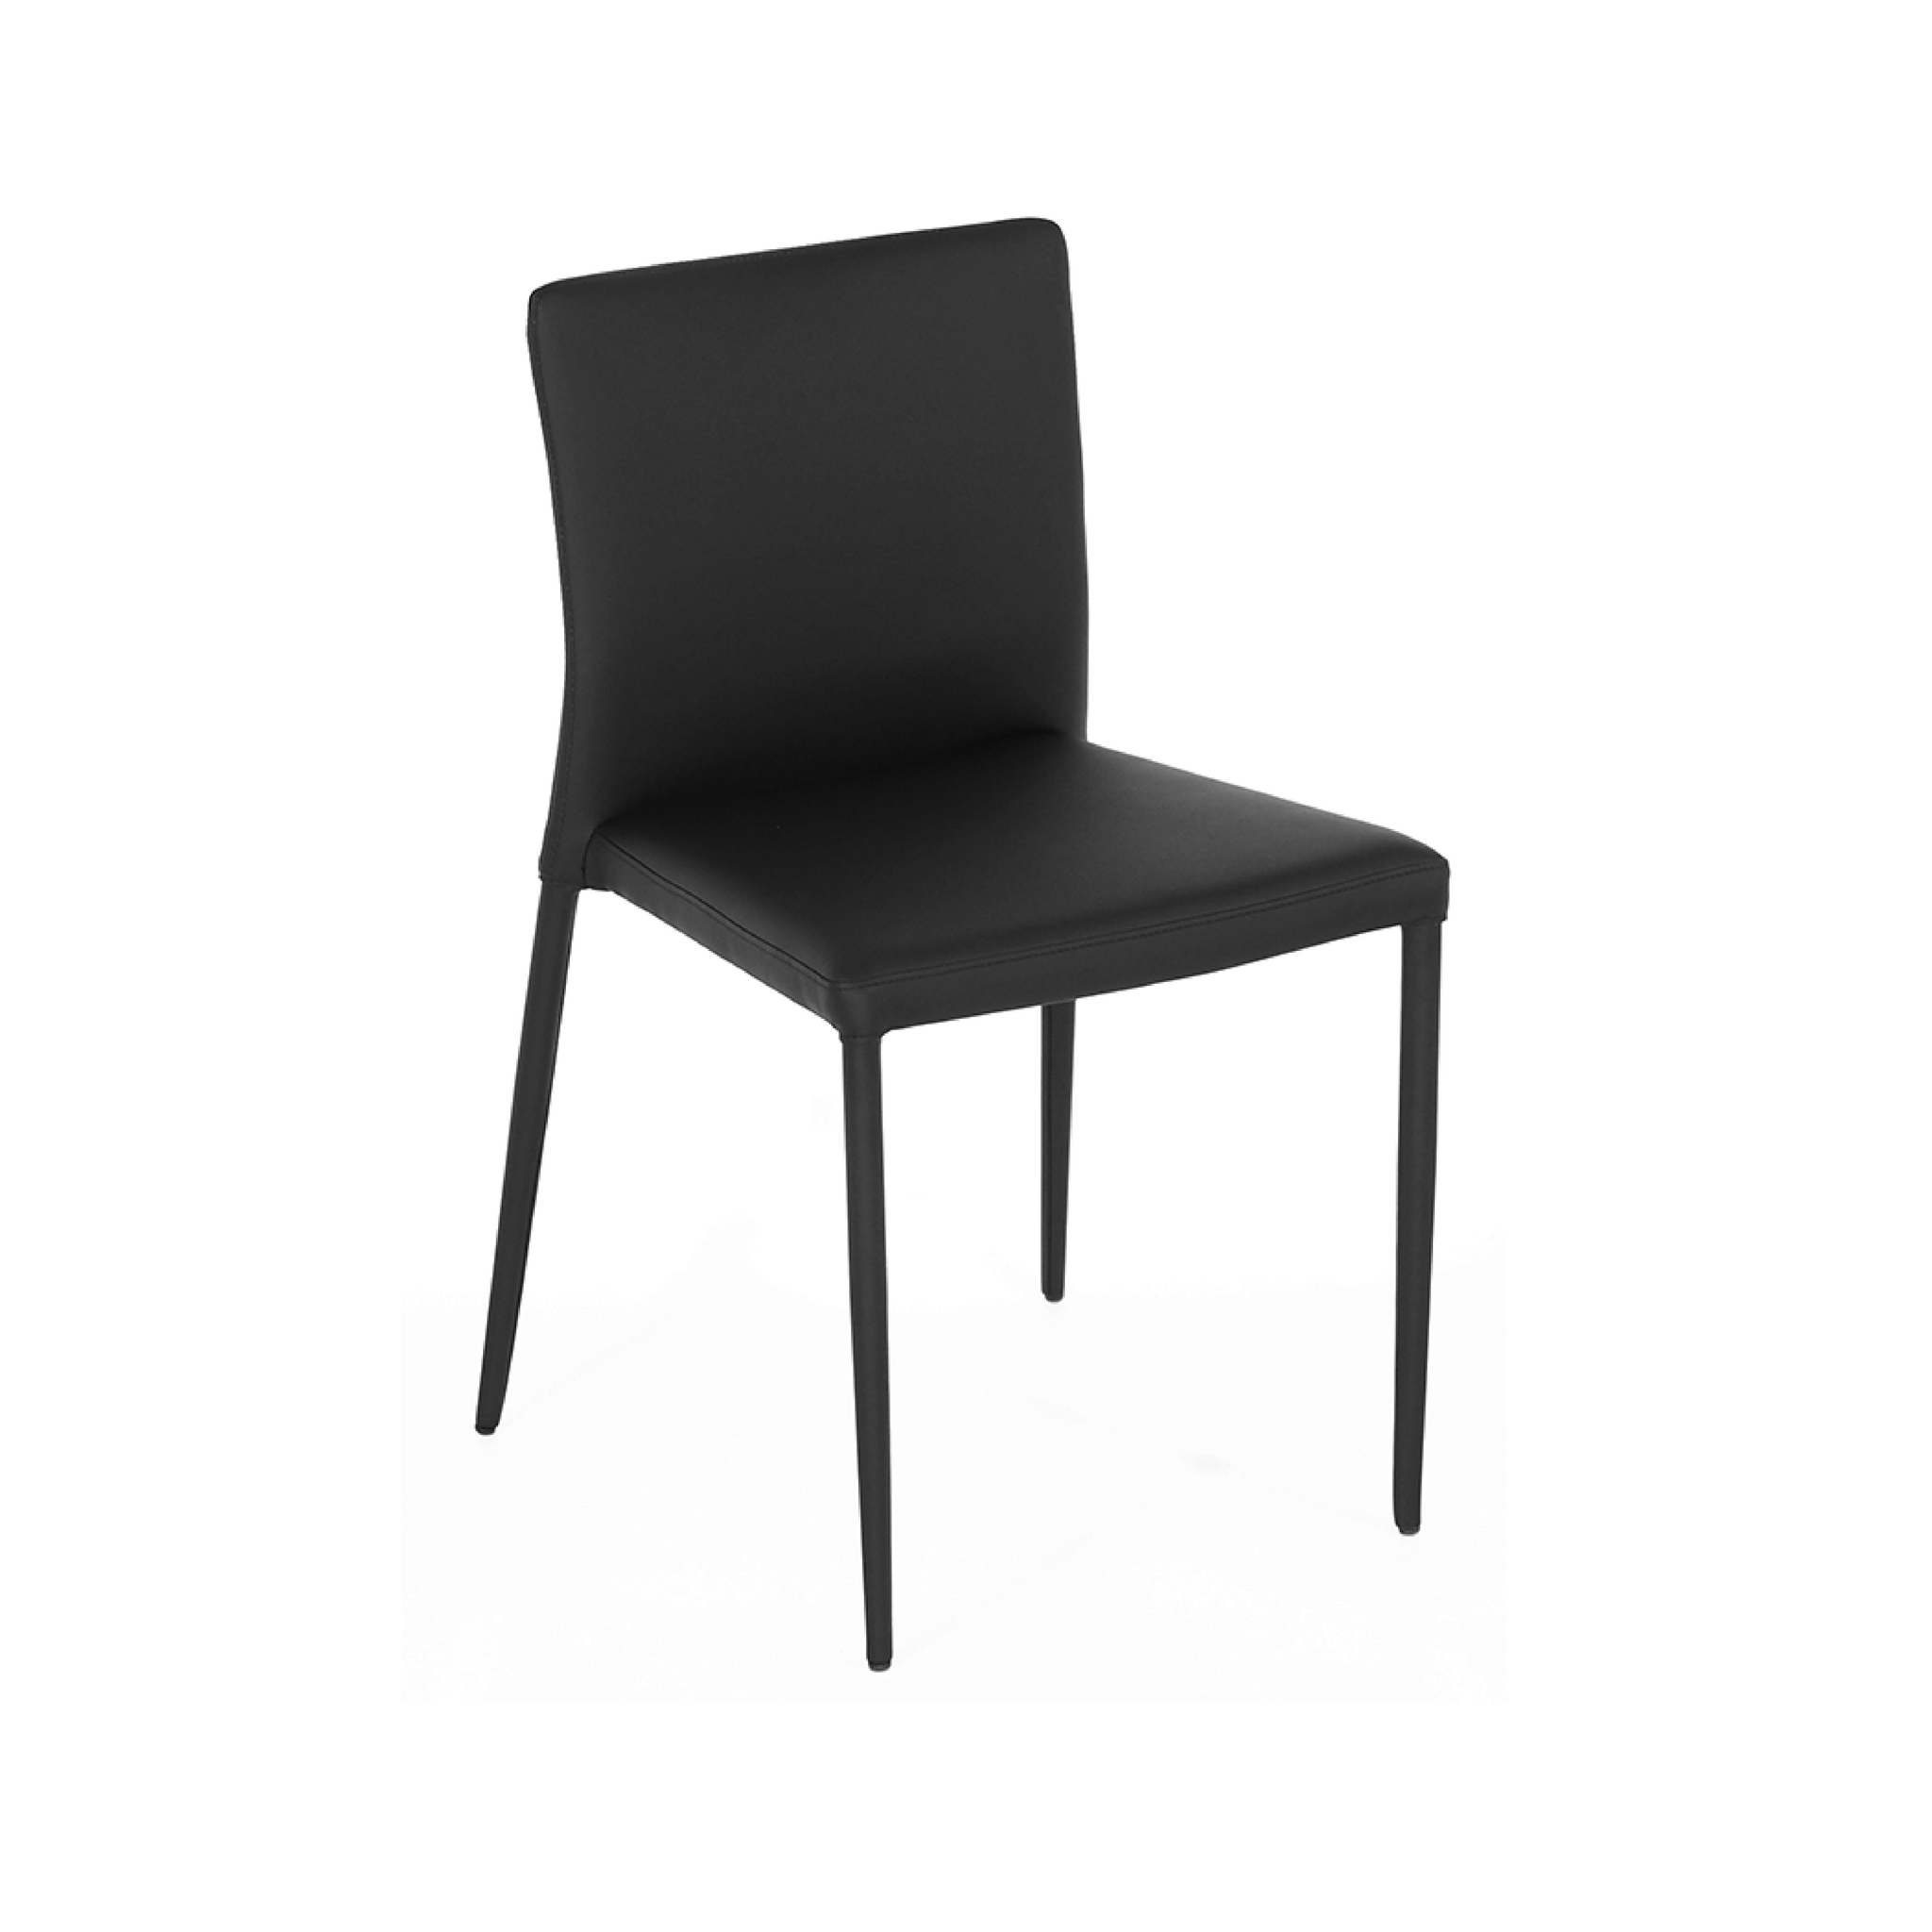 Fusion Chair in black